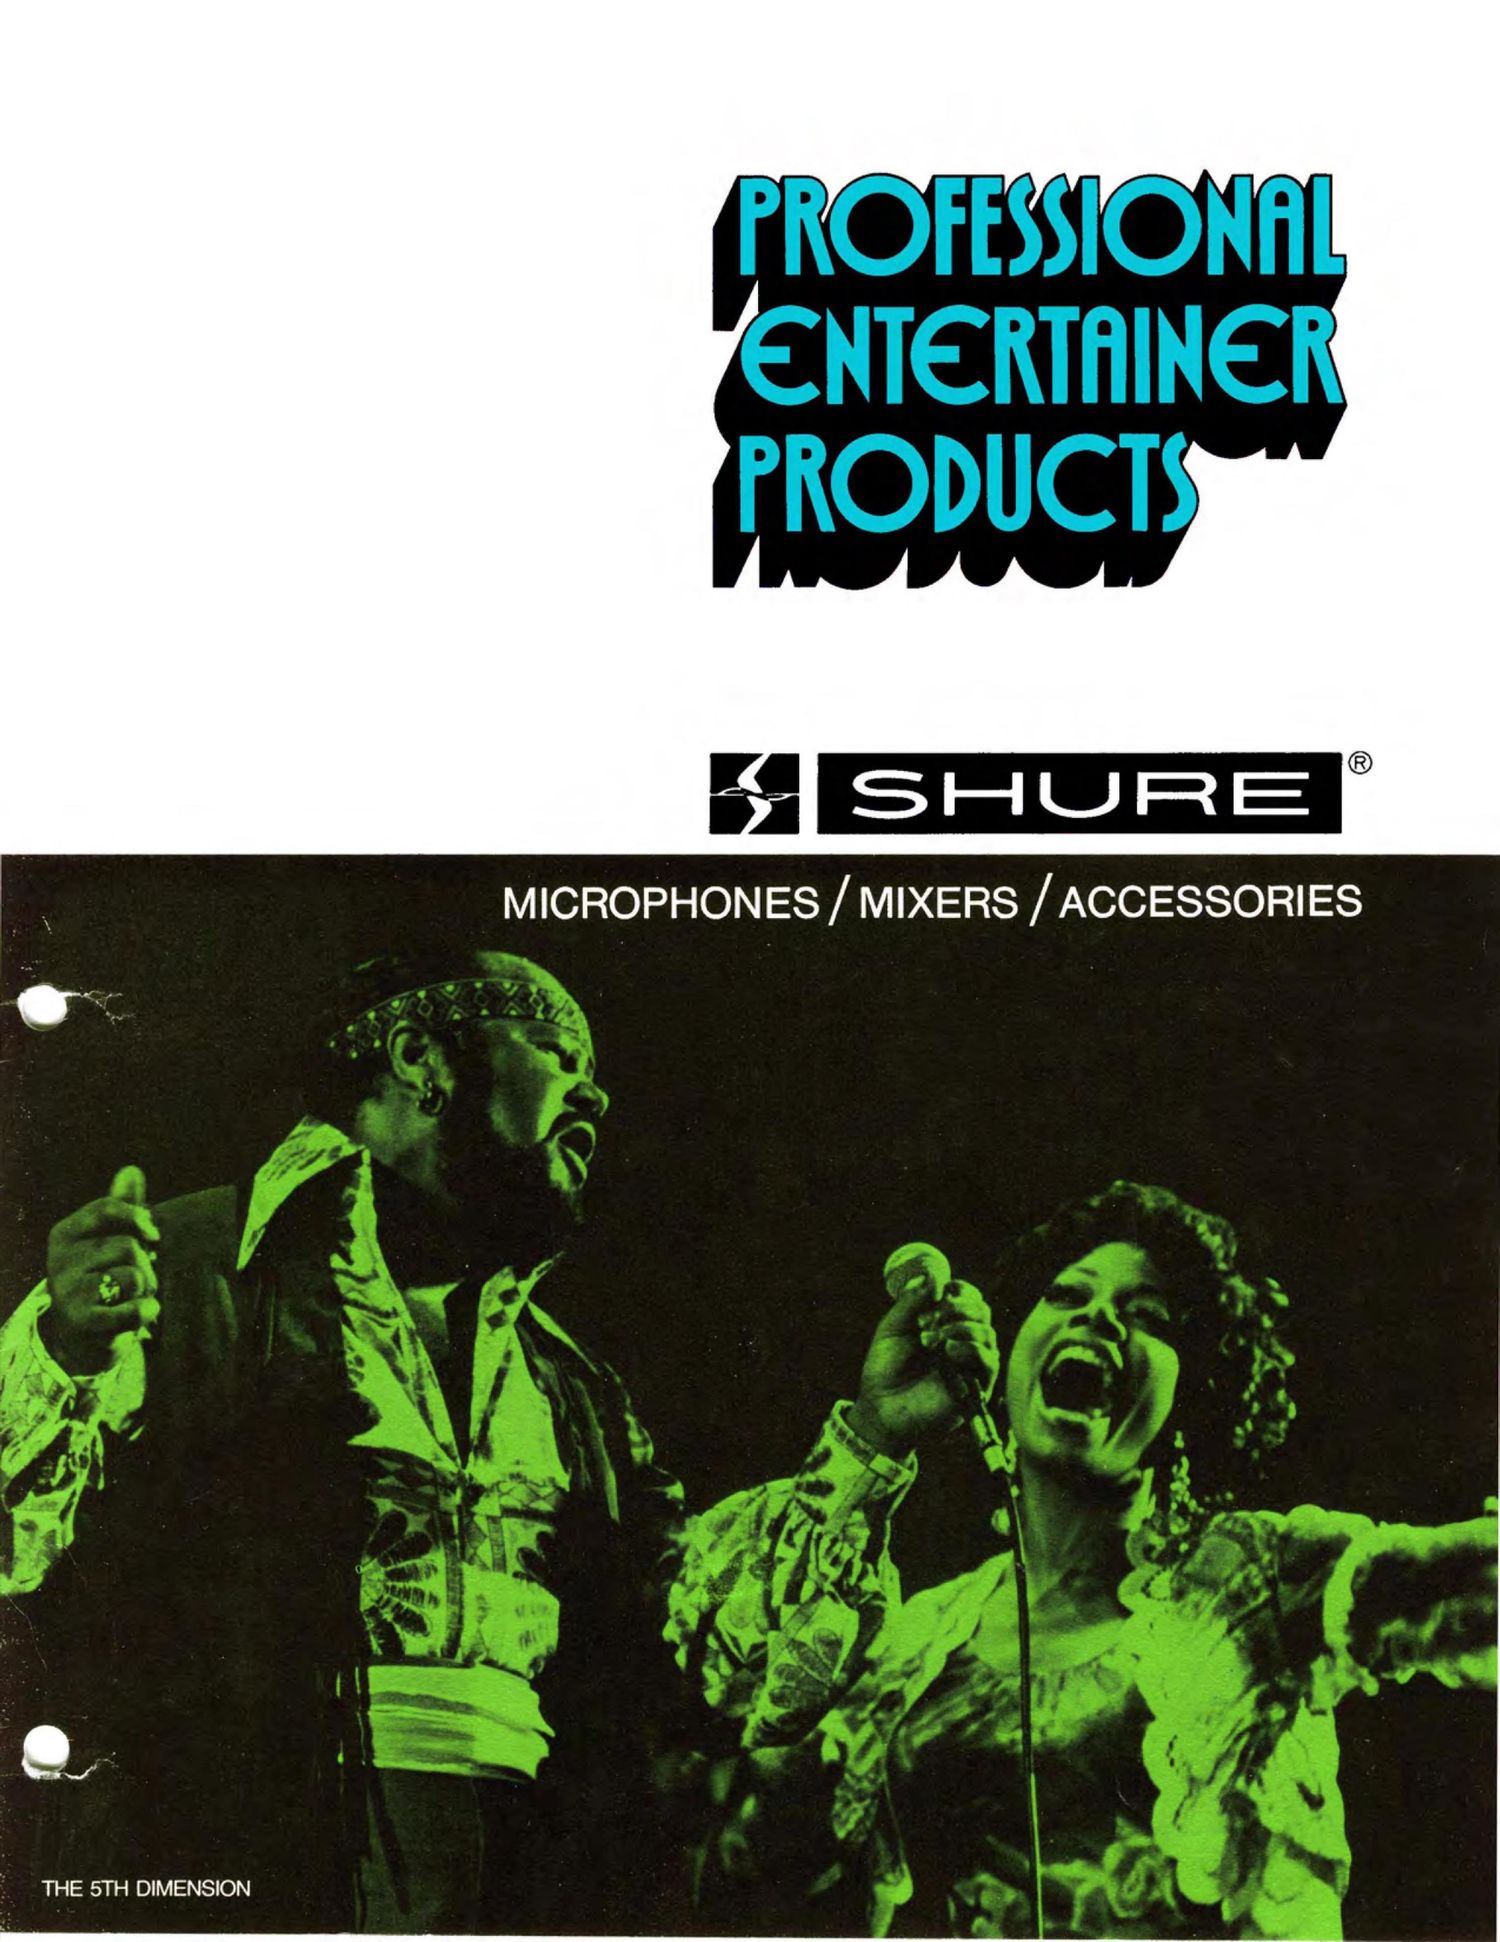 shure 1972 catalogue professional entertainer products